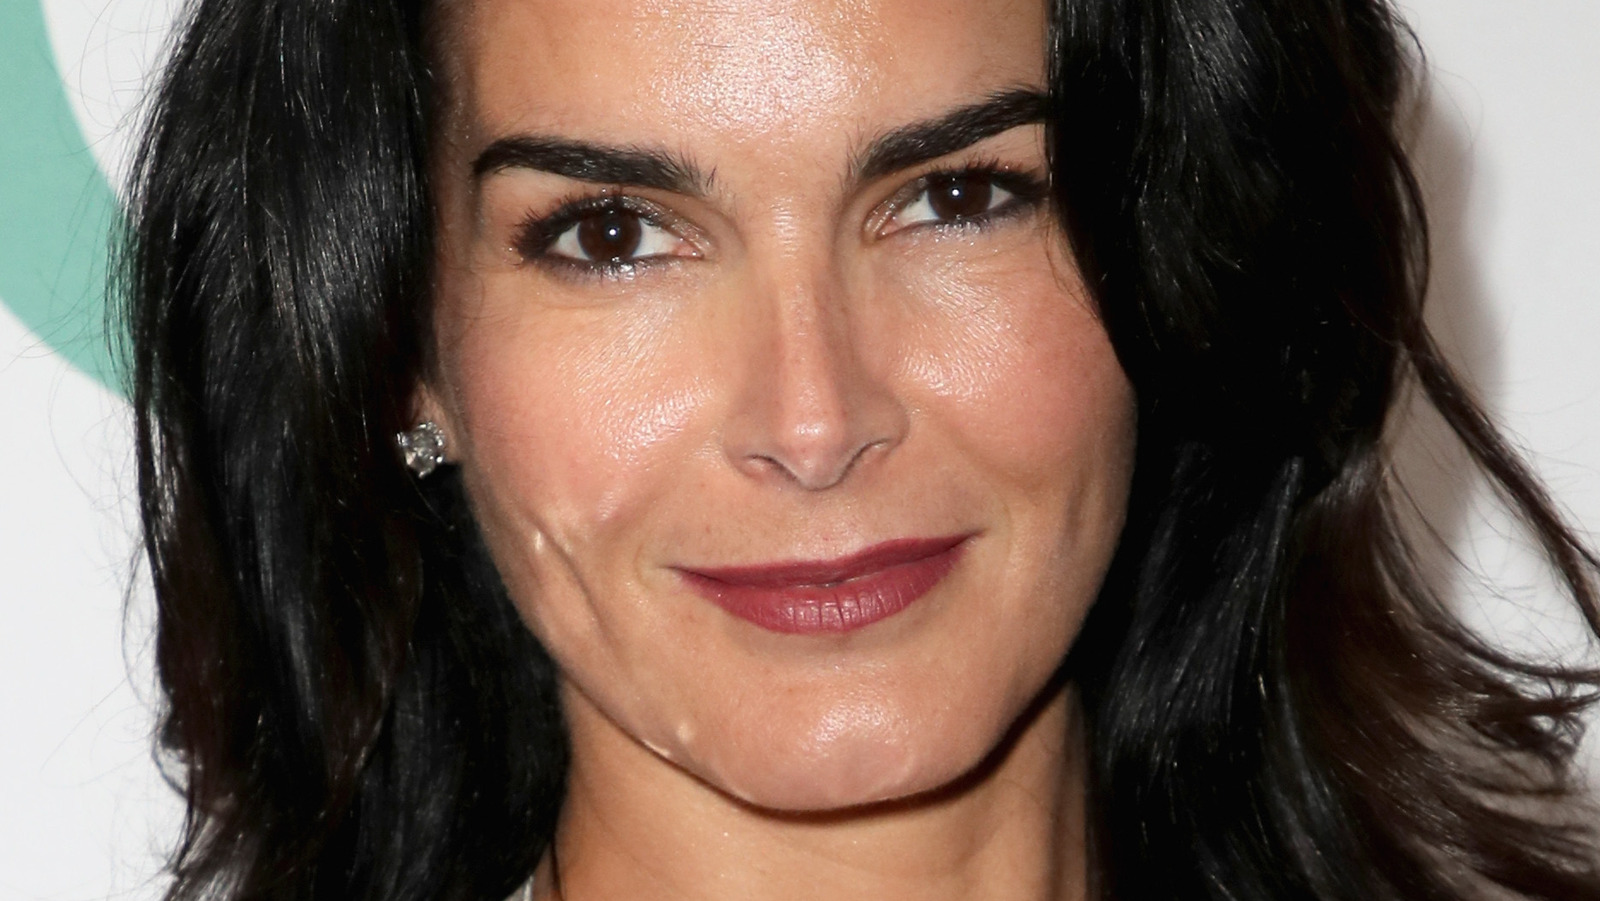 Angie Harmon Porn Films - The Transformation Of Angie Harmon From 15 To 49 Years Old